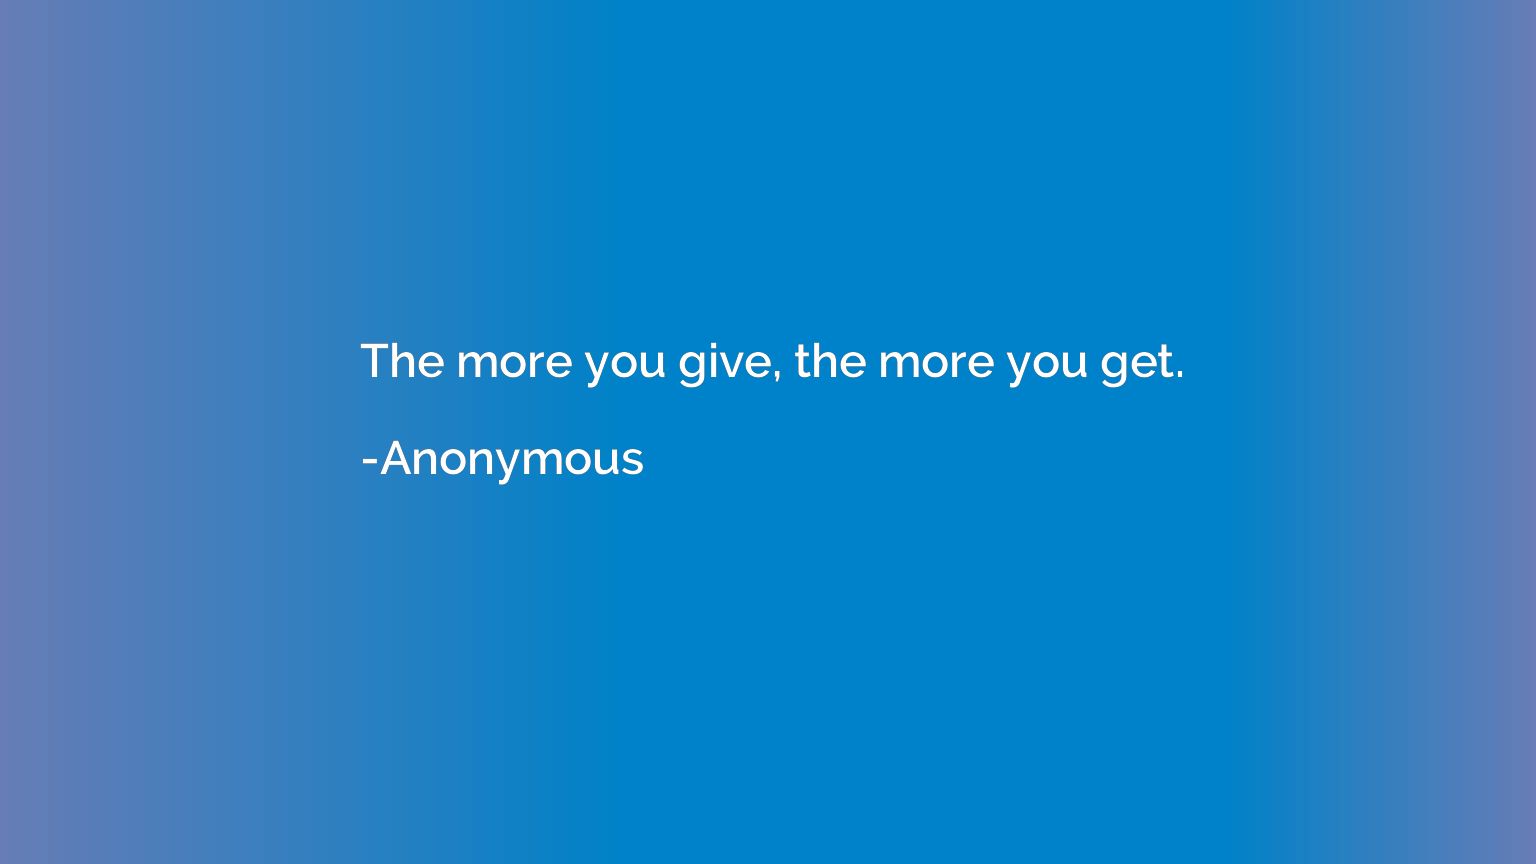 The more you give, the more you get.